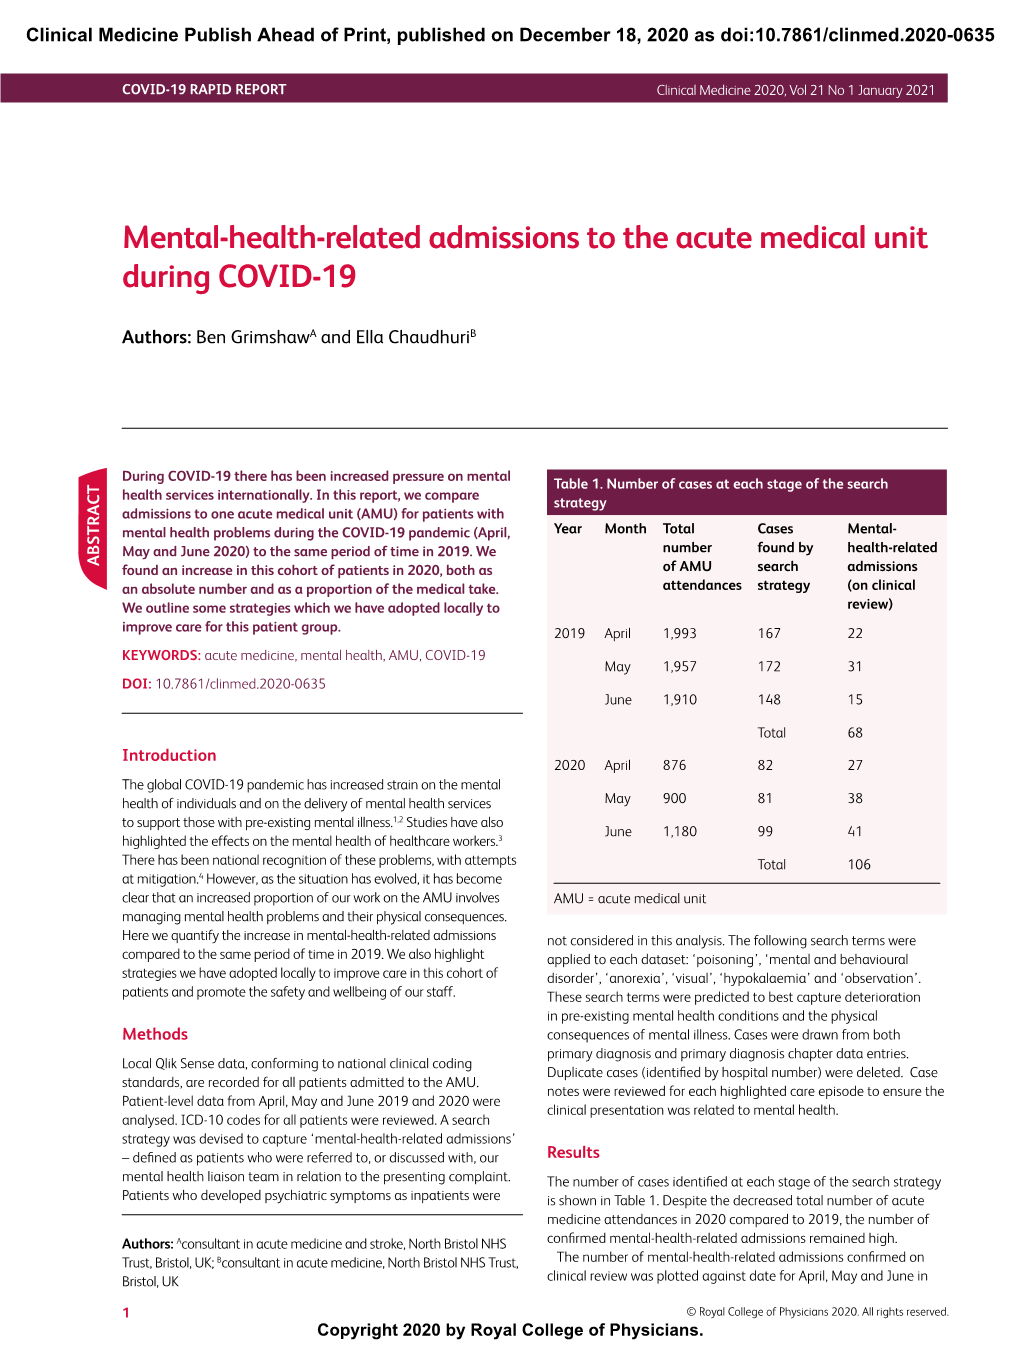 Mental-Health-Related Admissions to the Acute Medical Unit During COVID-19